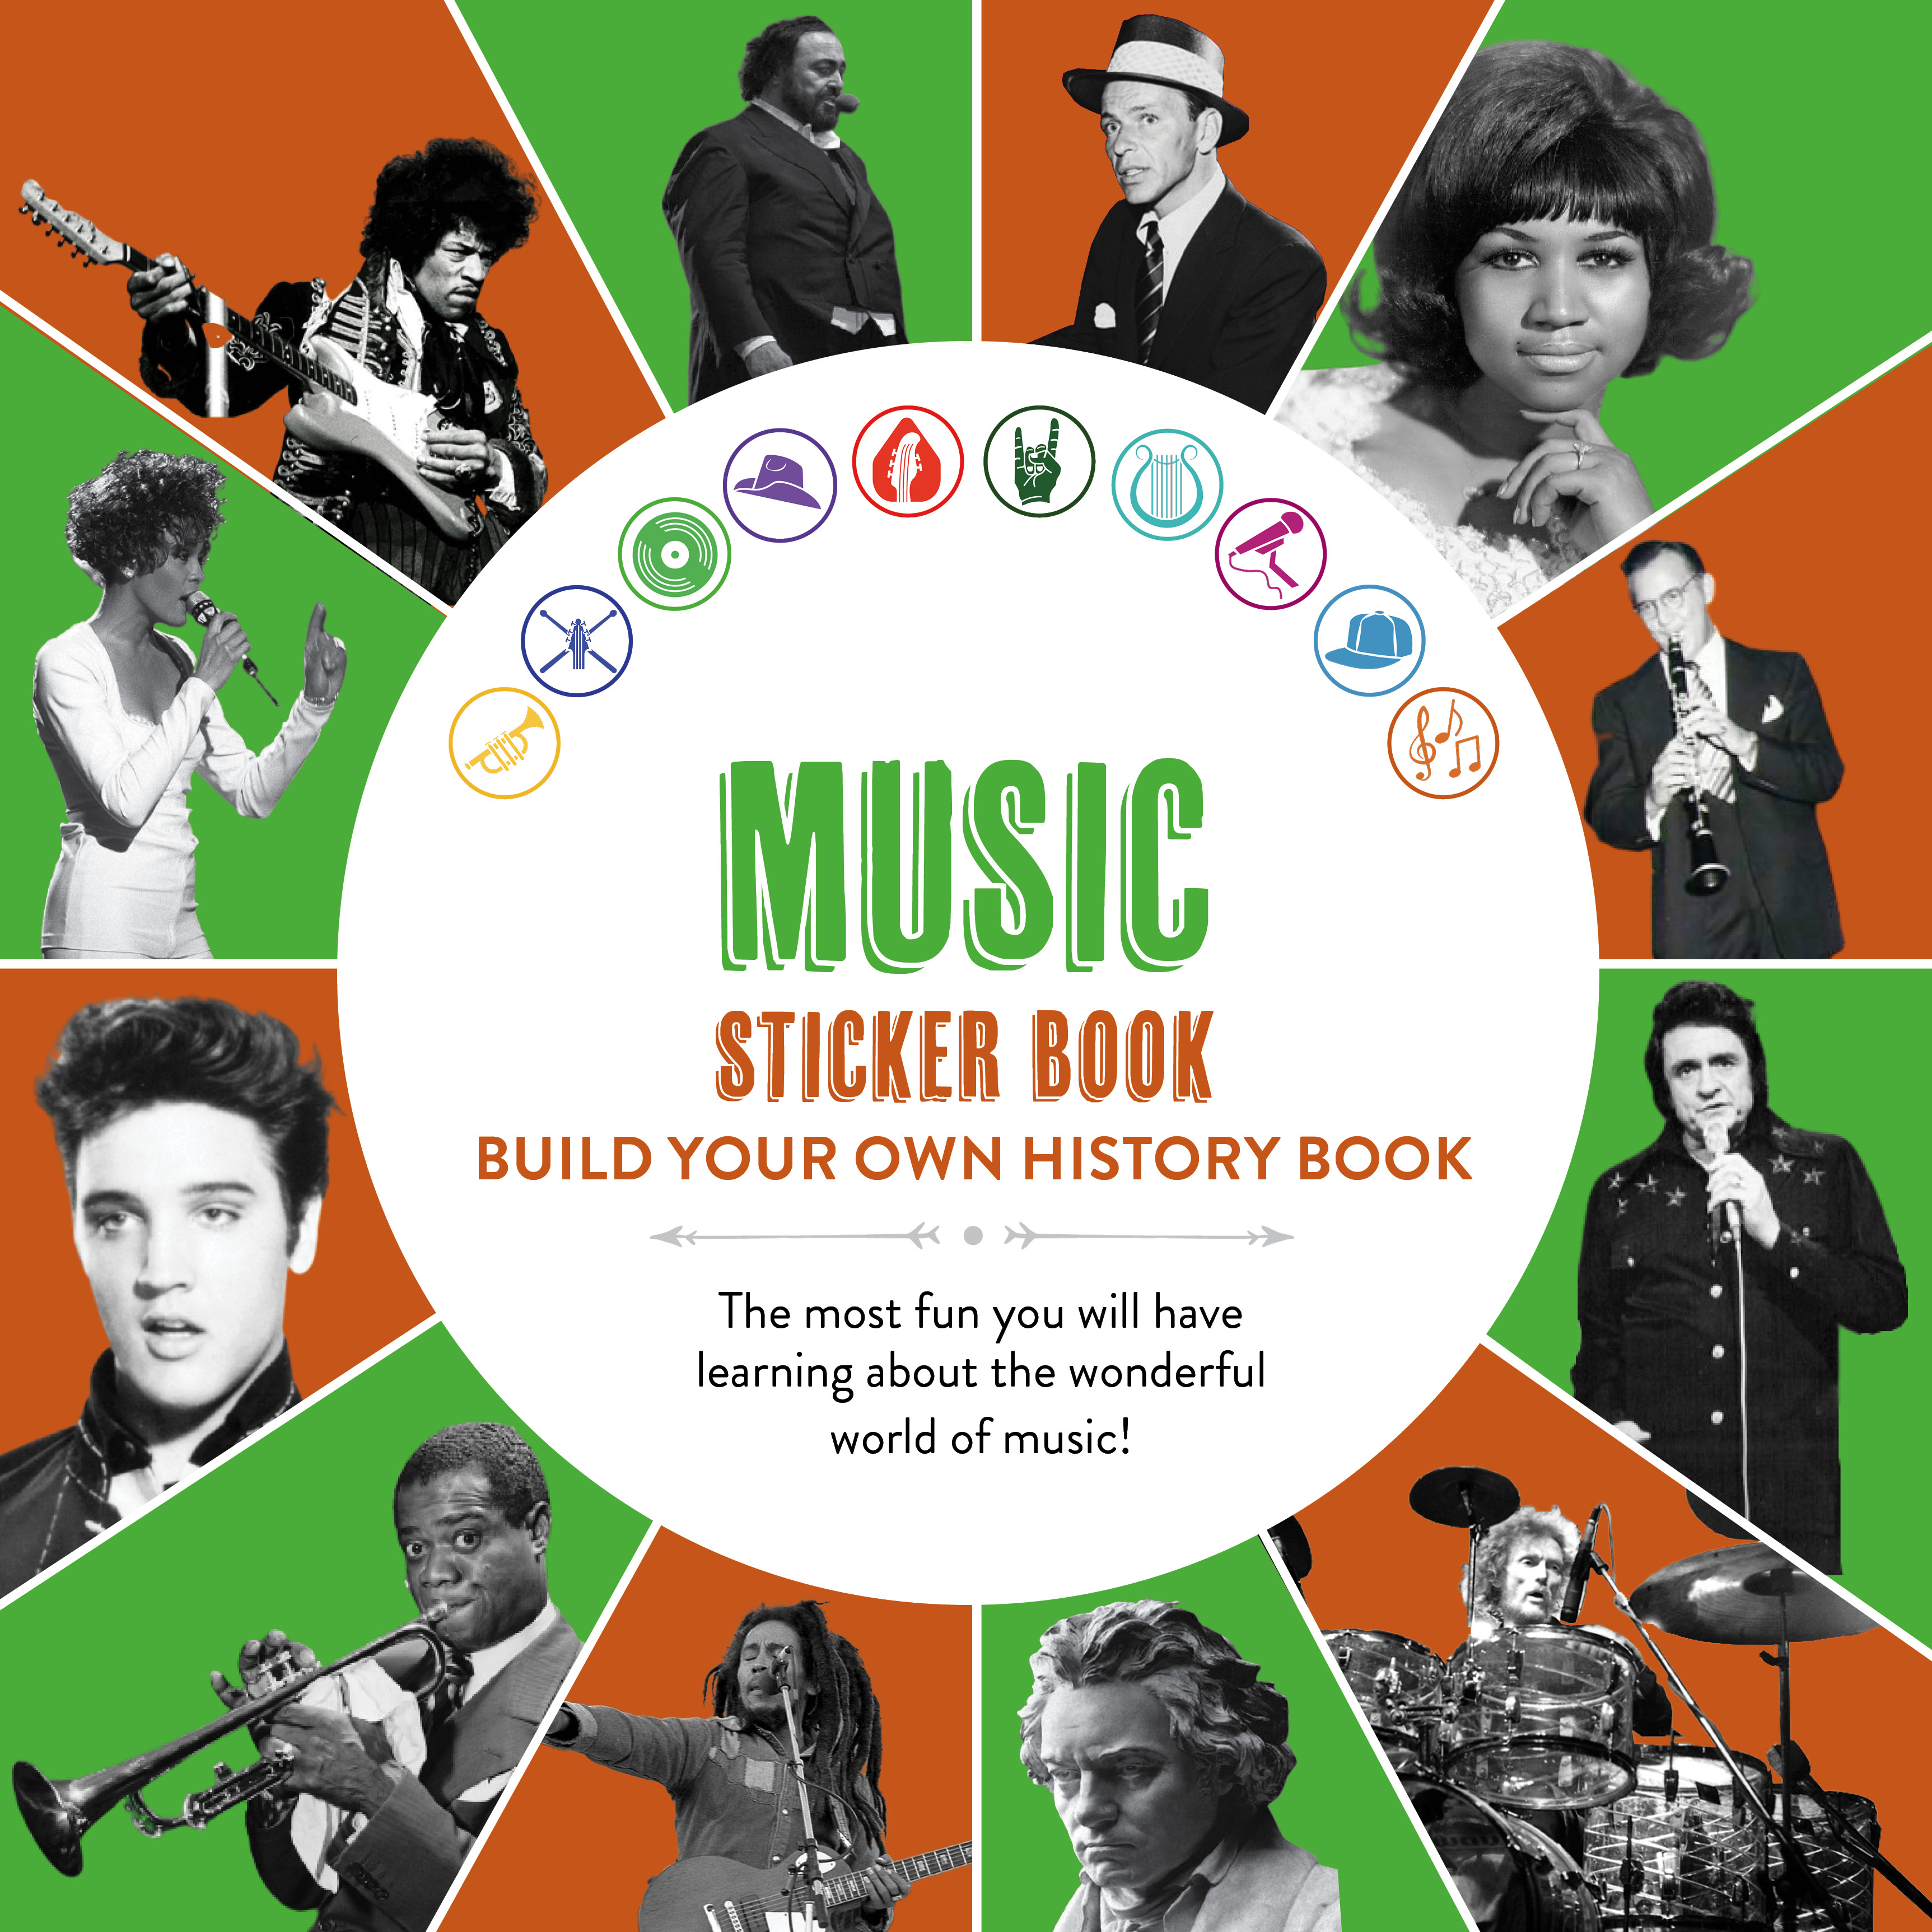 Image for "Music History Sticker Book"